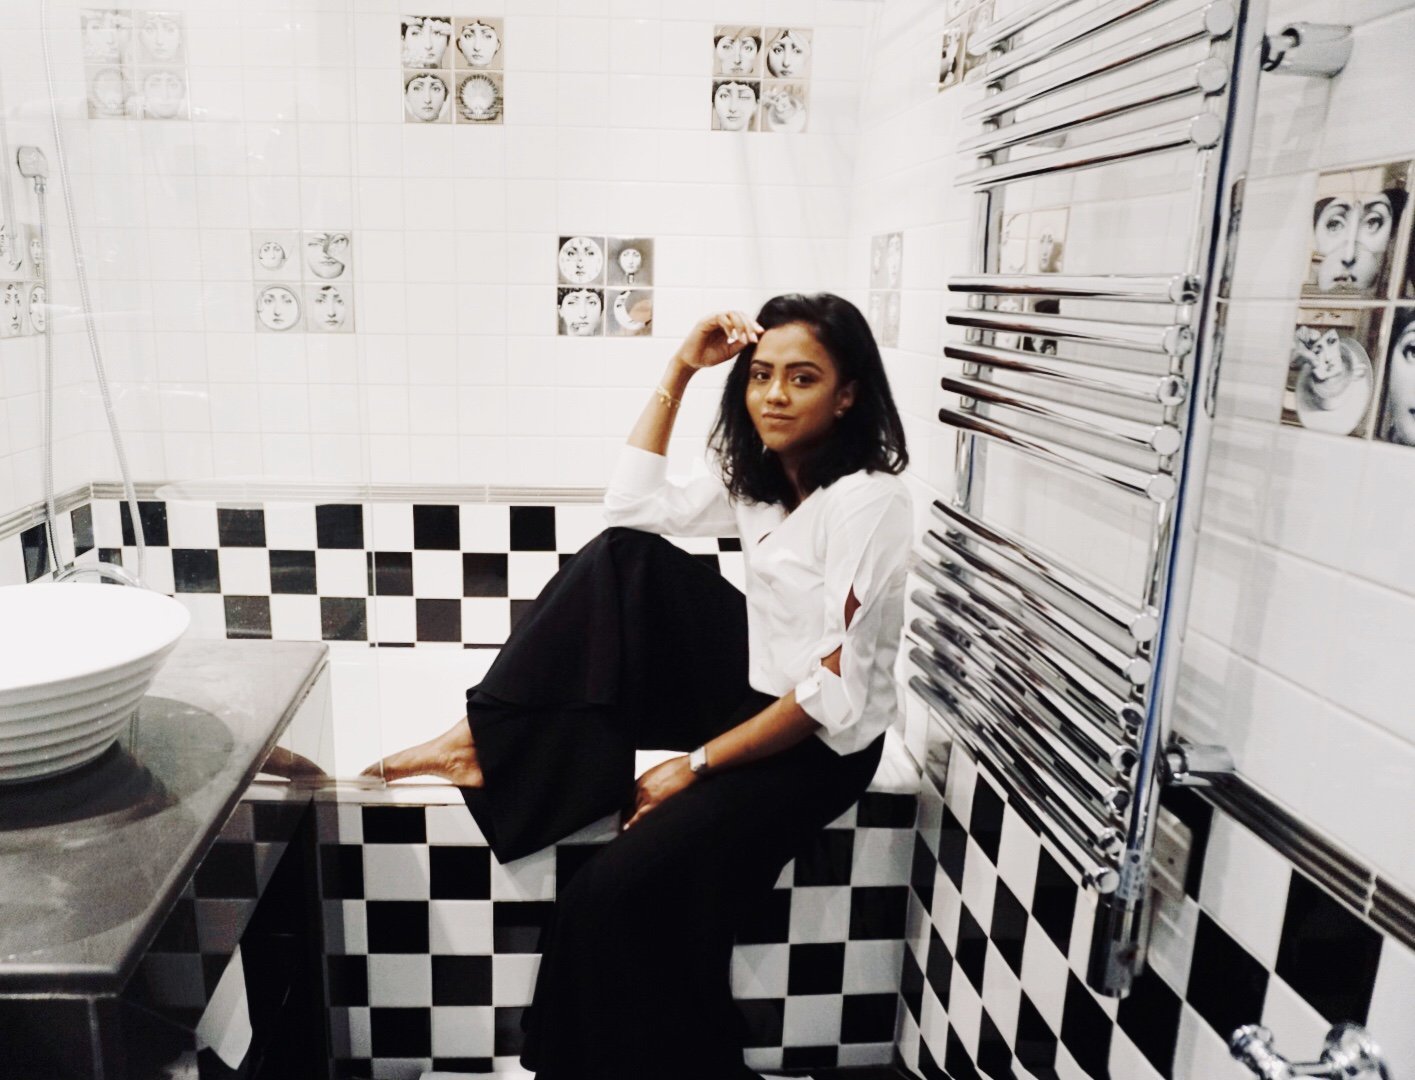 Sachini sitting on a black and white bath wearing a white shirt and black trousers